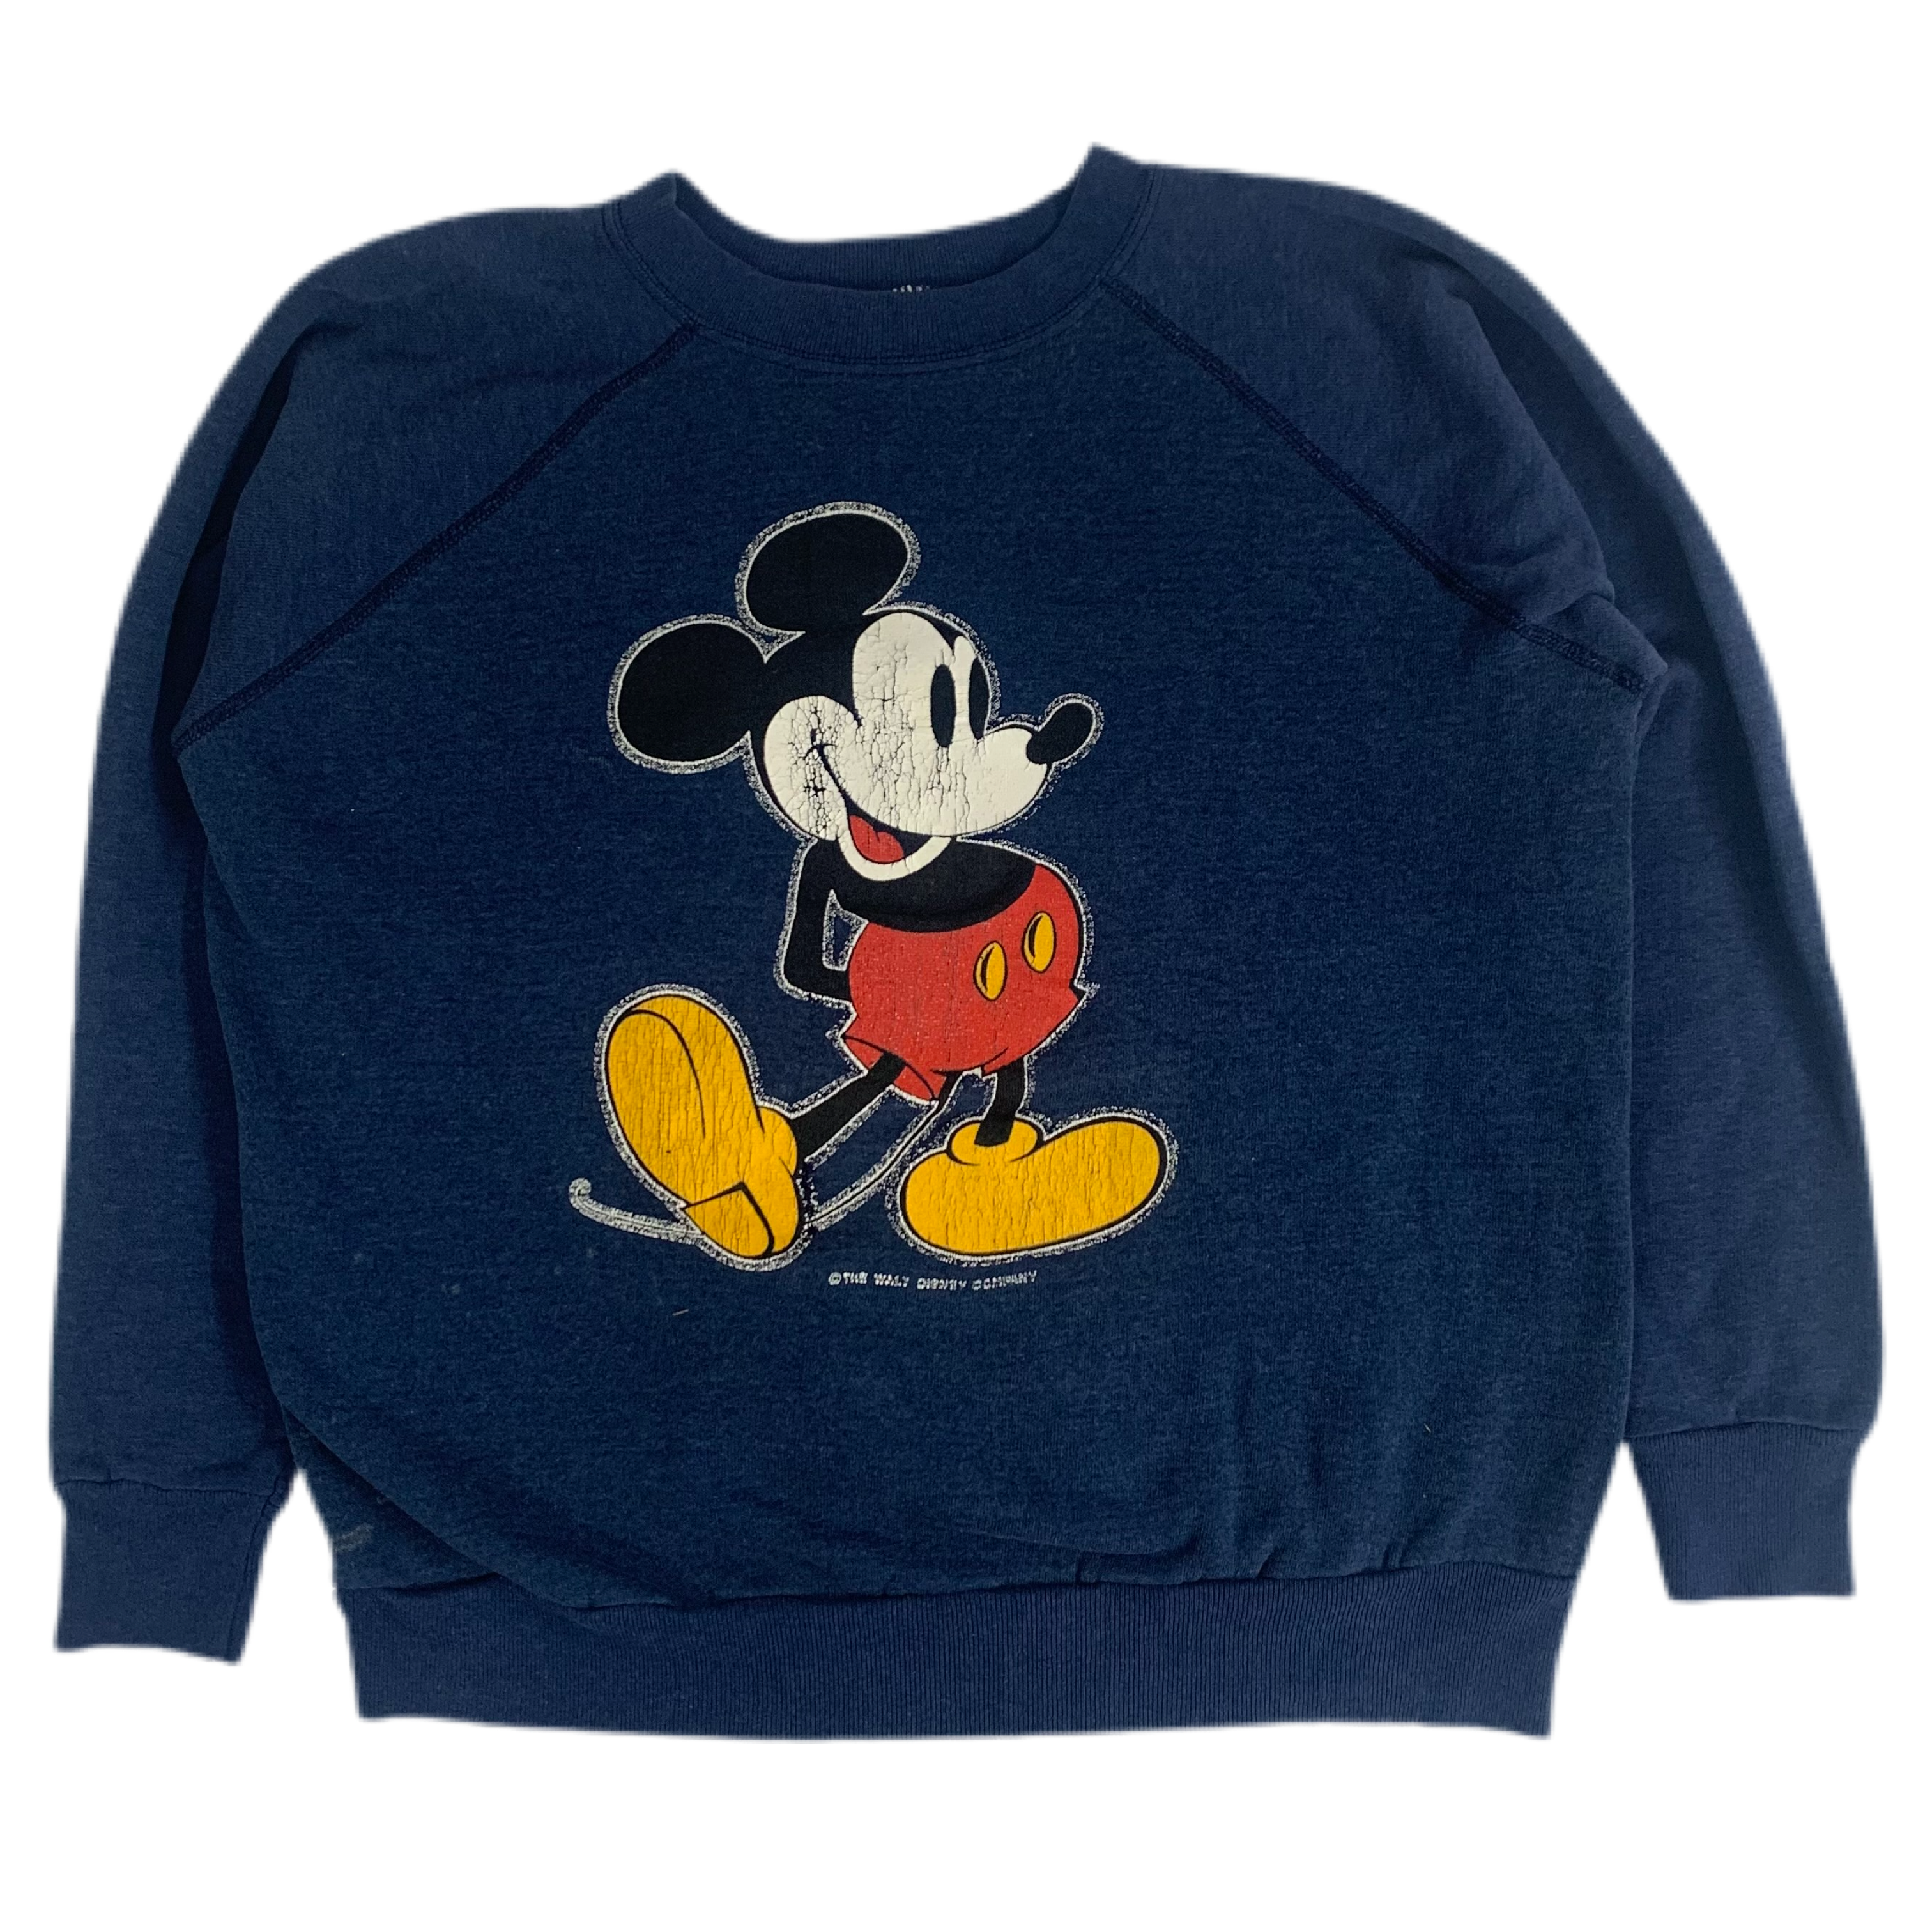 Vintage Mickey Mouse 